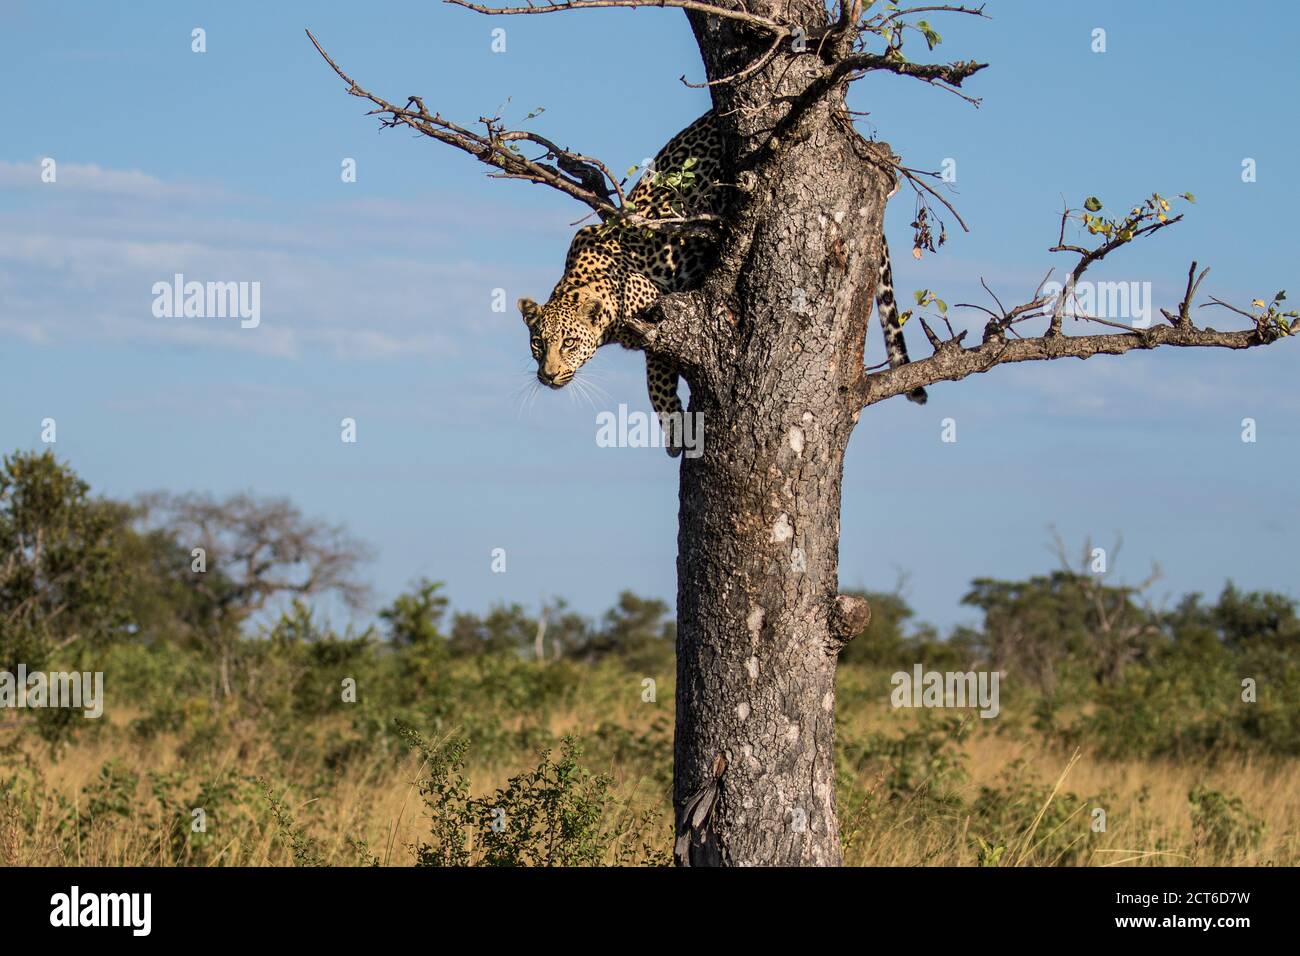 A leopard, Panthera pardus, glances down before jumping out of a tree. Stock Photo